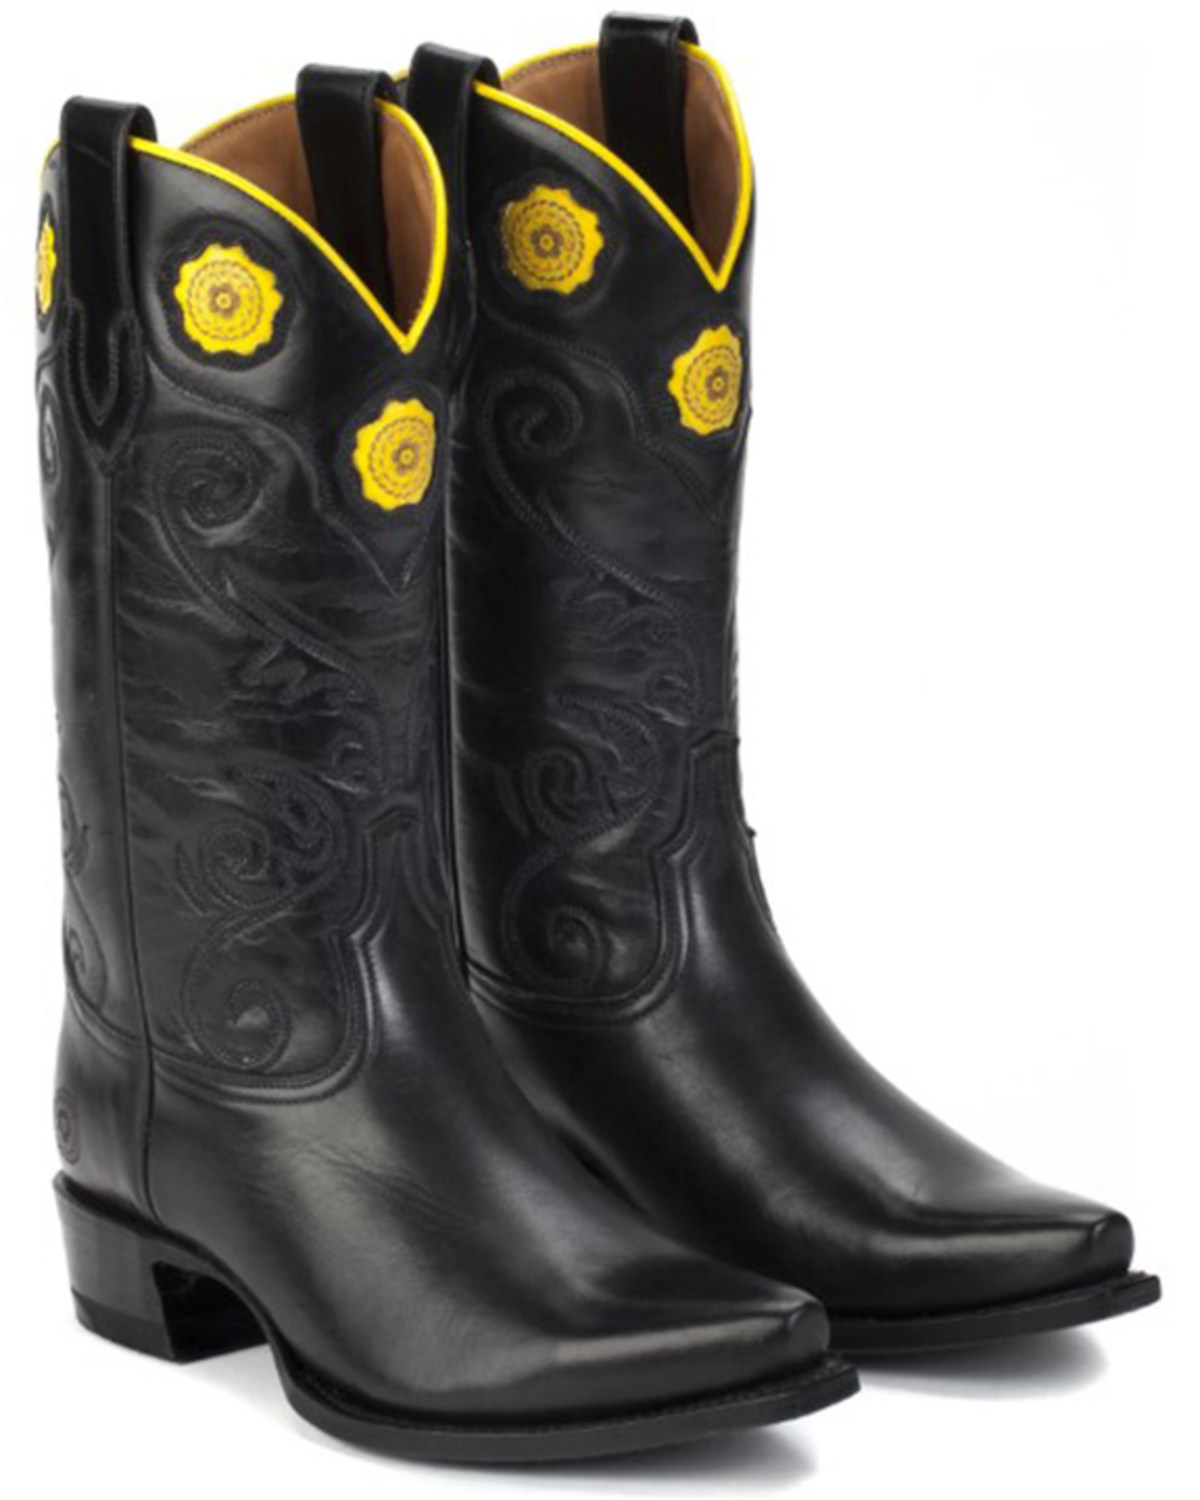 Ranch Road Boots Women's Rosette Floral Embroidered Western - Snip Toe